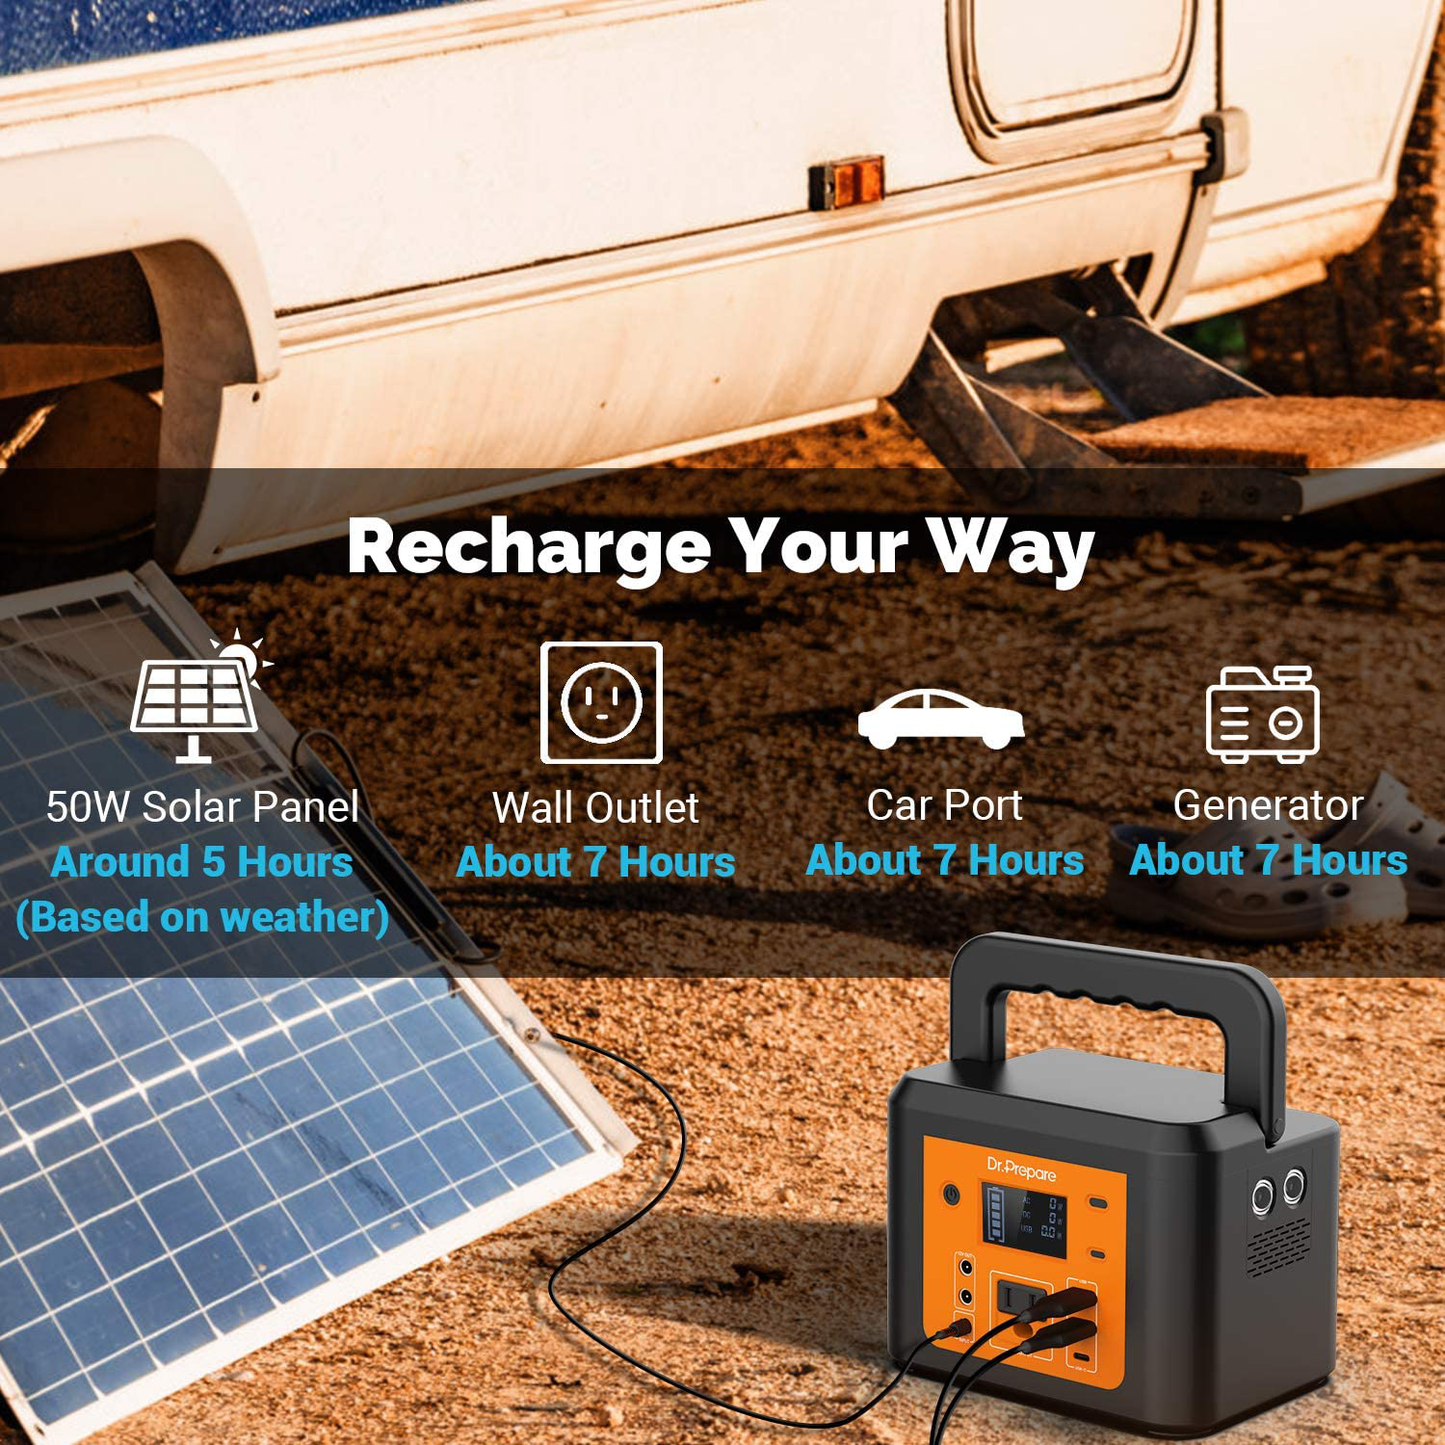 200W Peak Portable Power Station, Dr. Prepare 178Wh 48000mAh Solar Generator Outdoor Battery Backup Supply, CPAP Lithium Battery for Home, Camping with 180W AC Outlet, 2 DC Ports for Emergency House